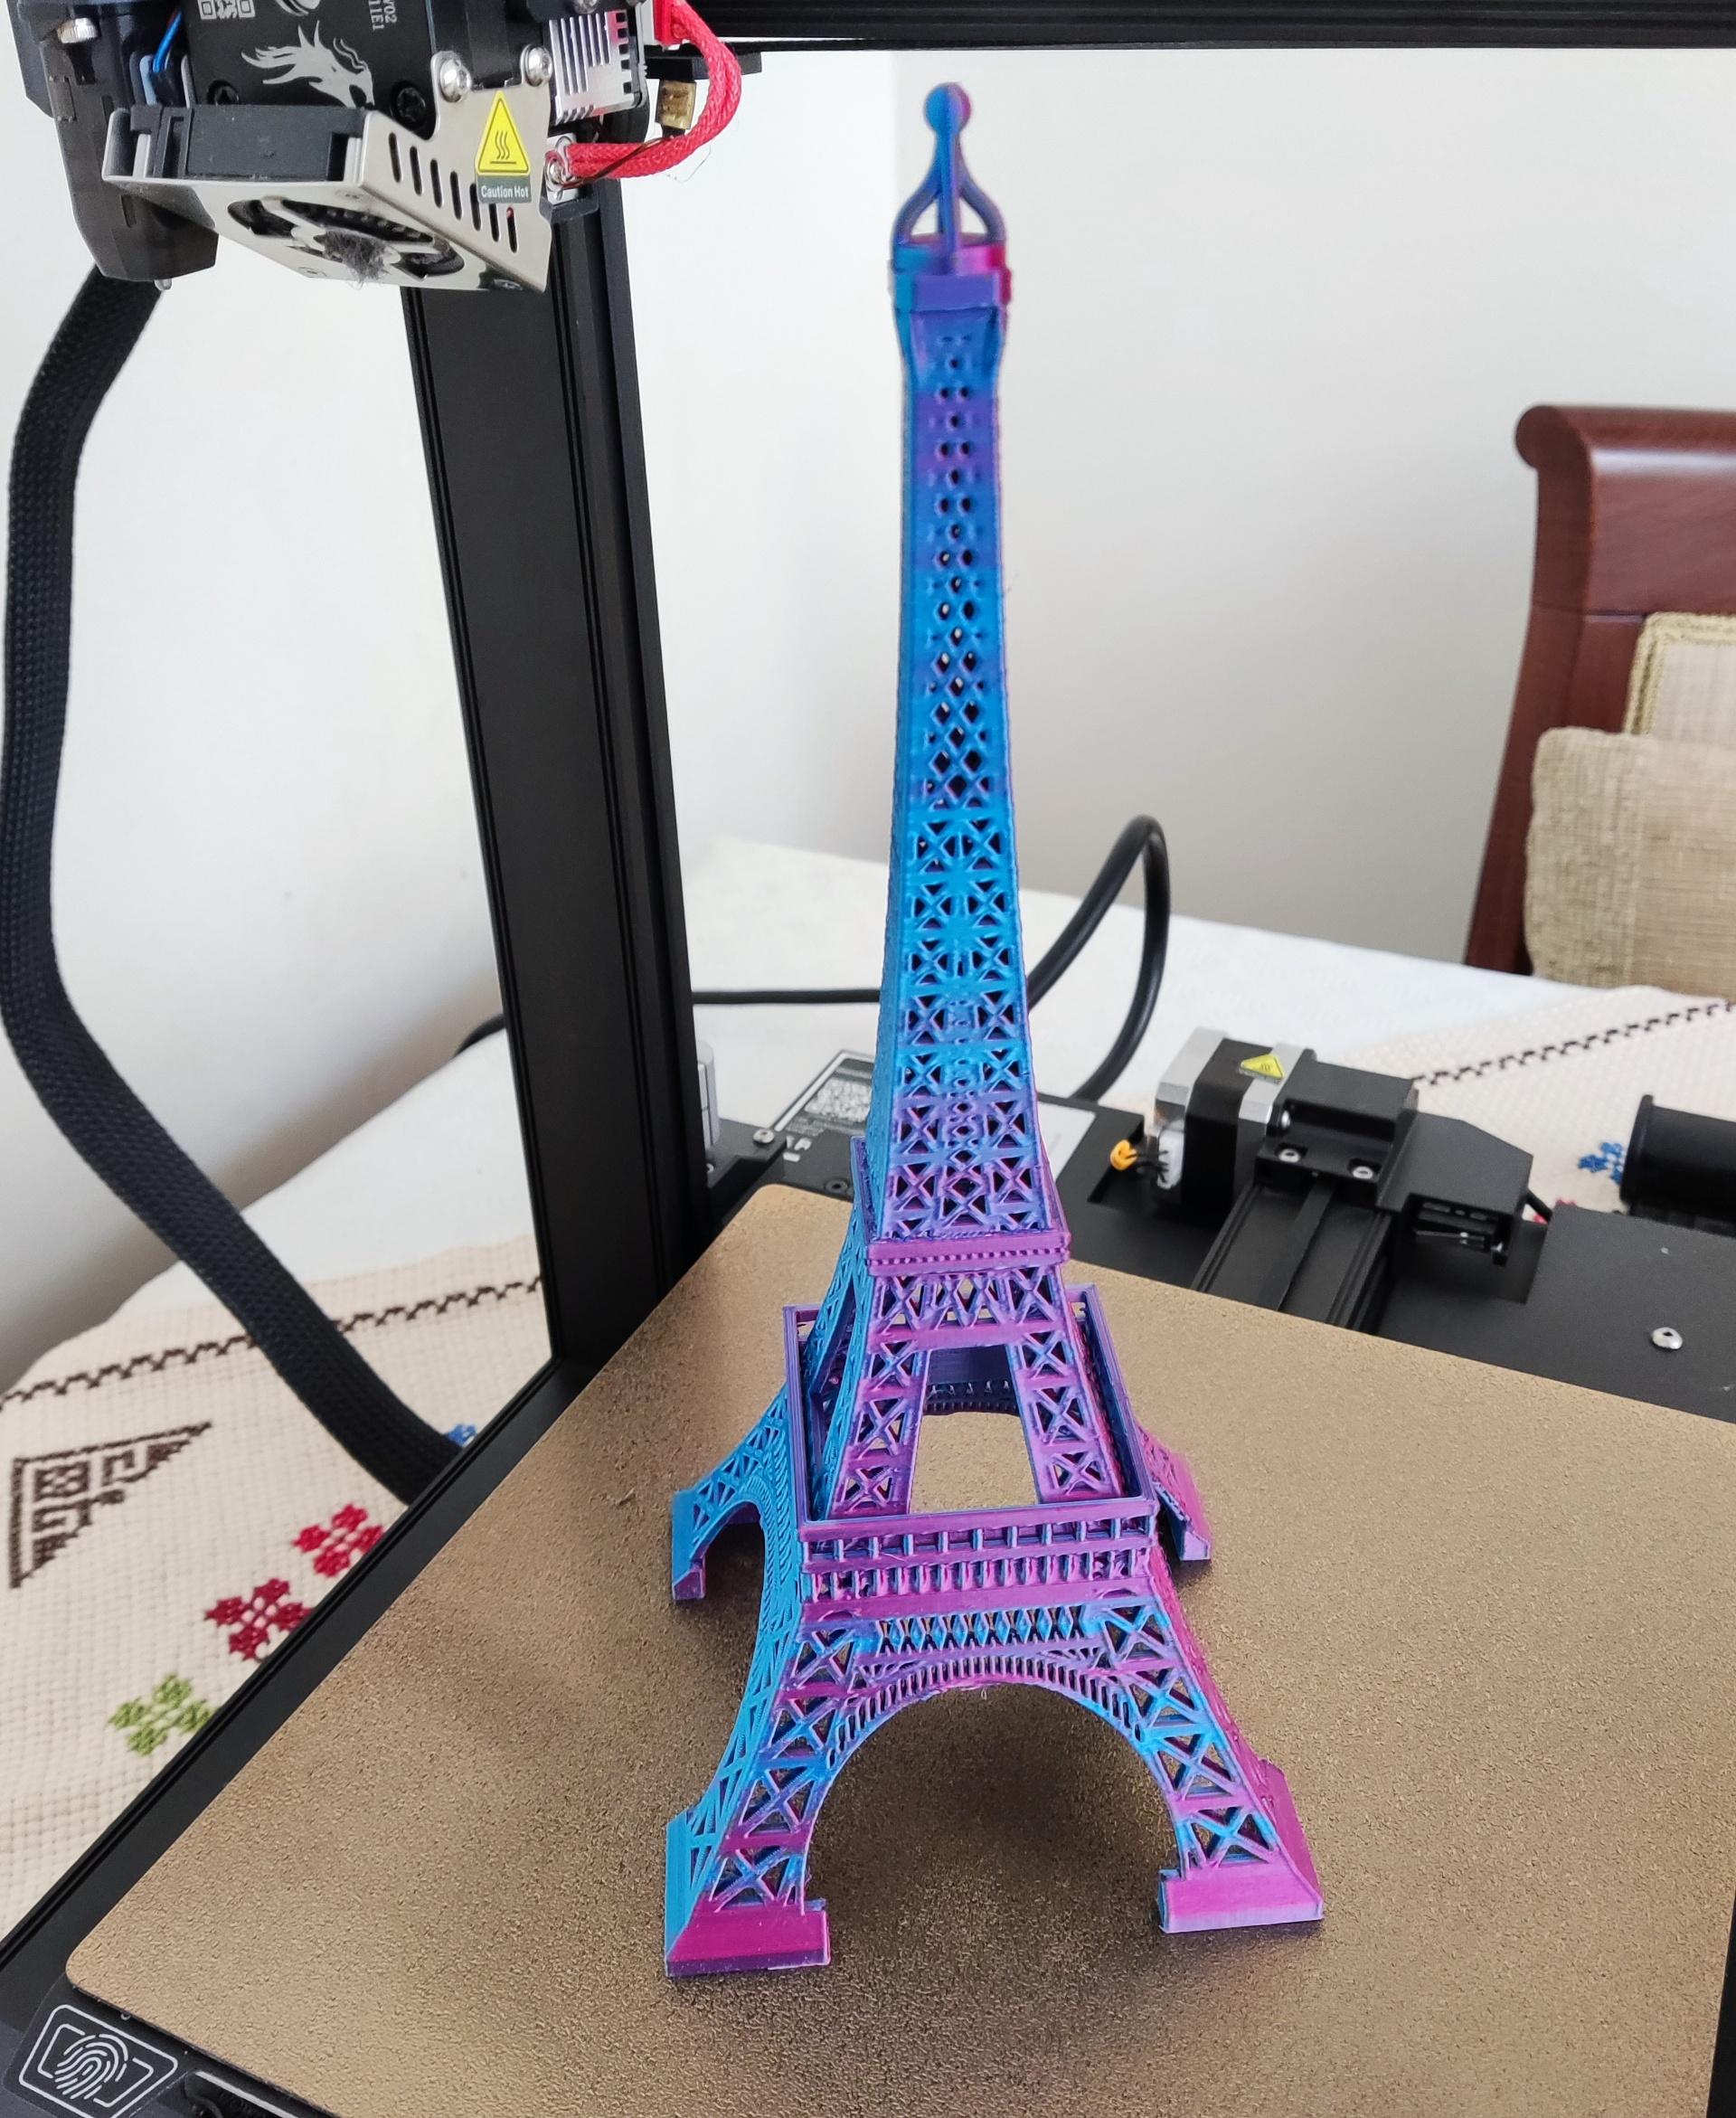 Eiffel Tower support free 3D Printable - Thank you. It printed perfectly on my ender 3 s1 with e-sun silkmagic pla - 3d model